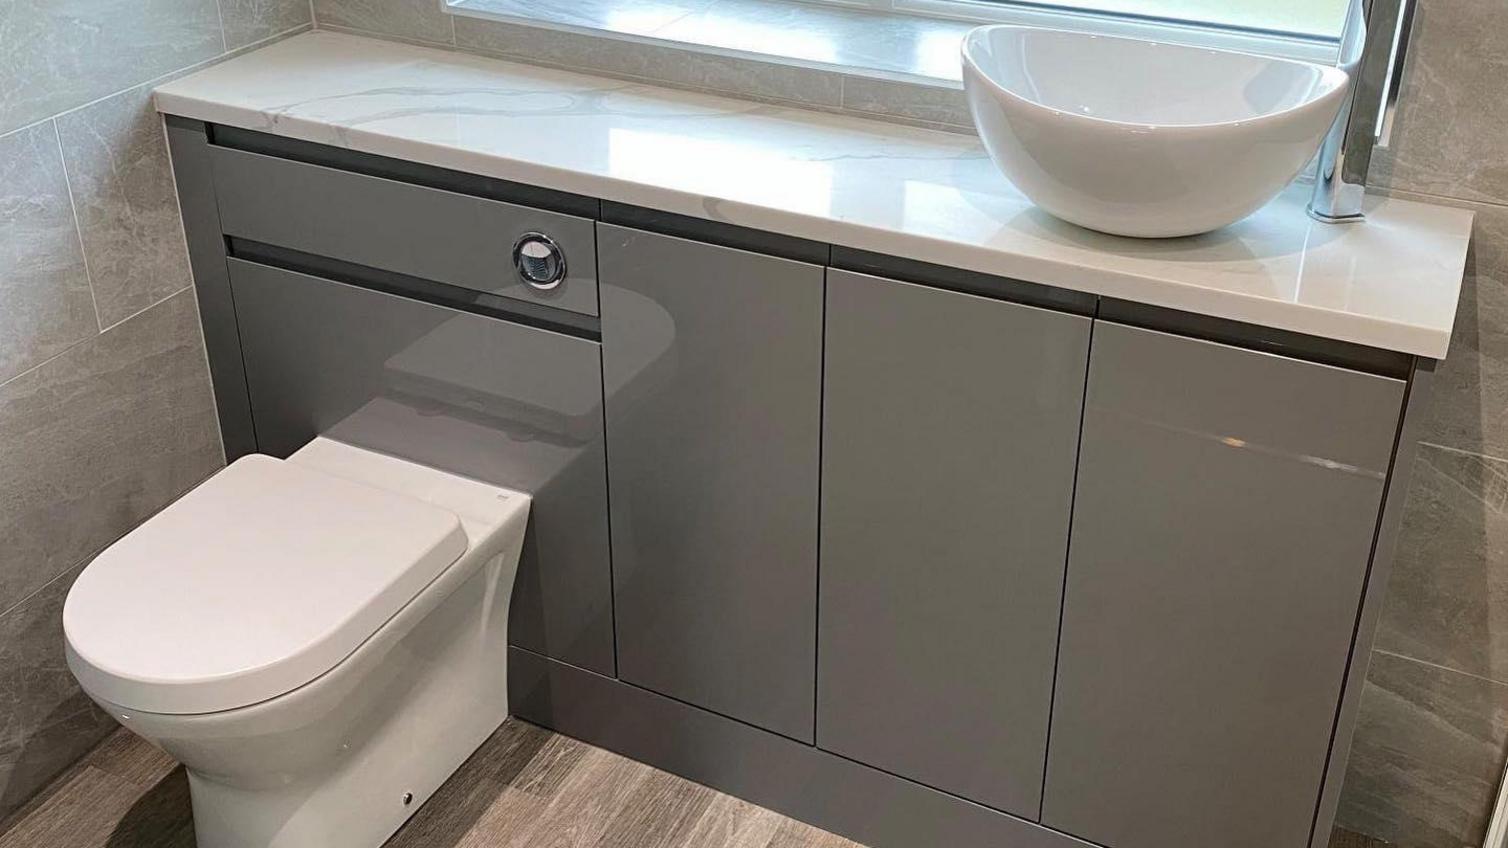 A contemporary bathroom idea featuring glossy grey cupboard doors with an integrated handle design. Includes a white worktop.